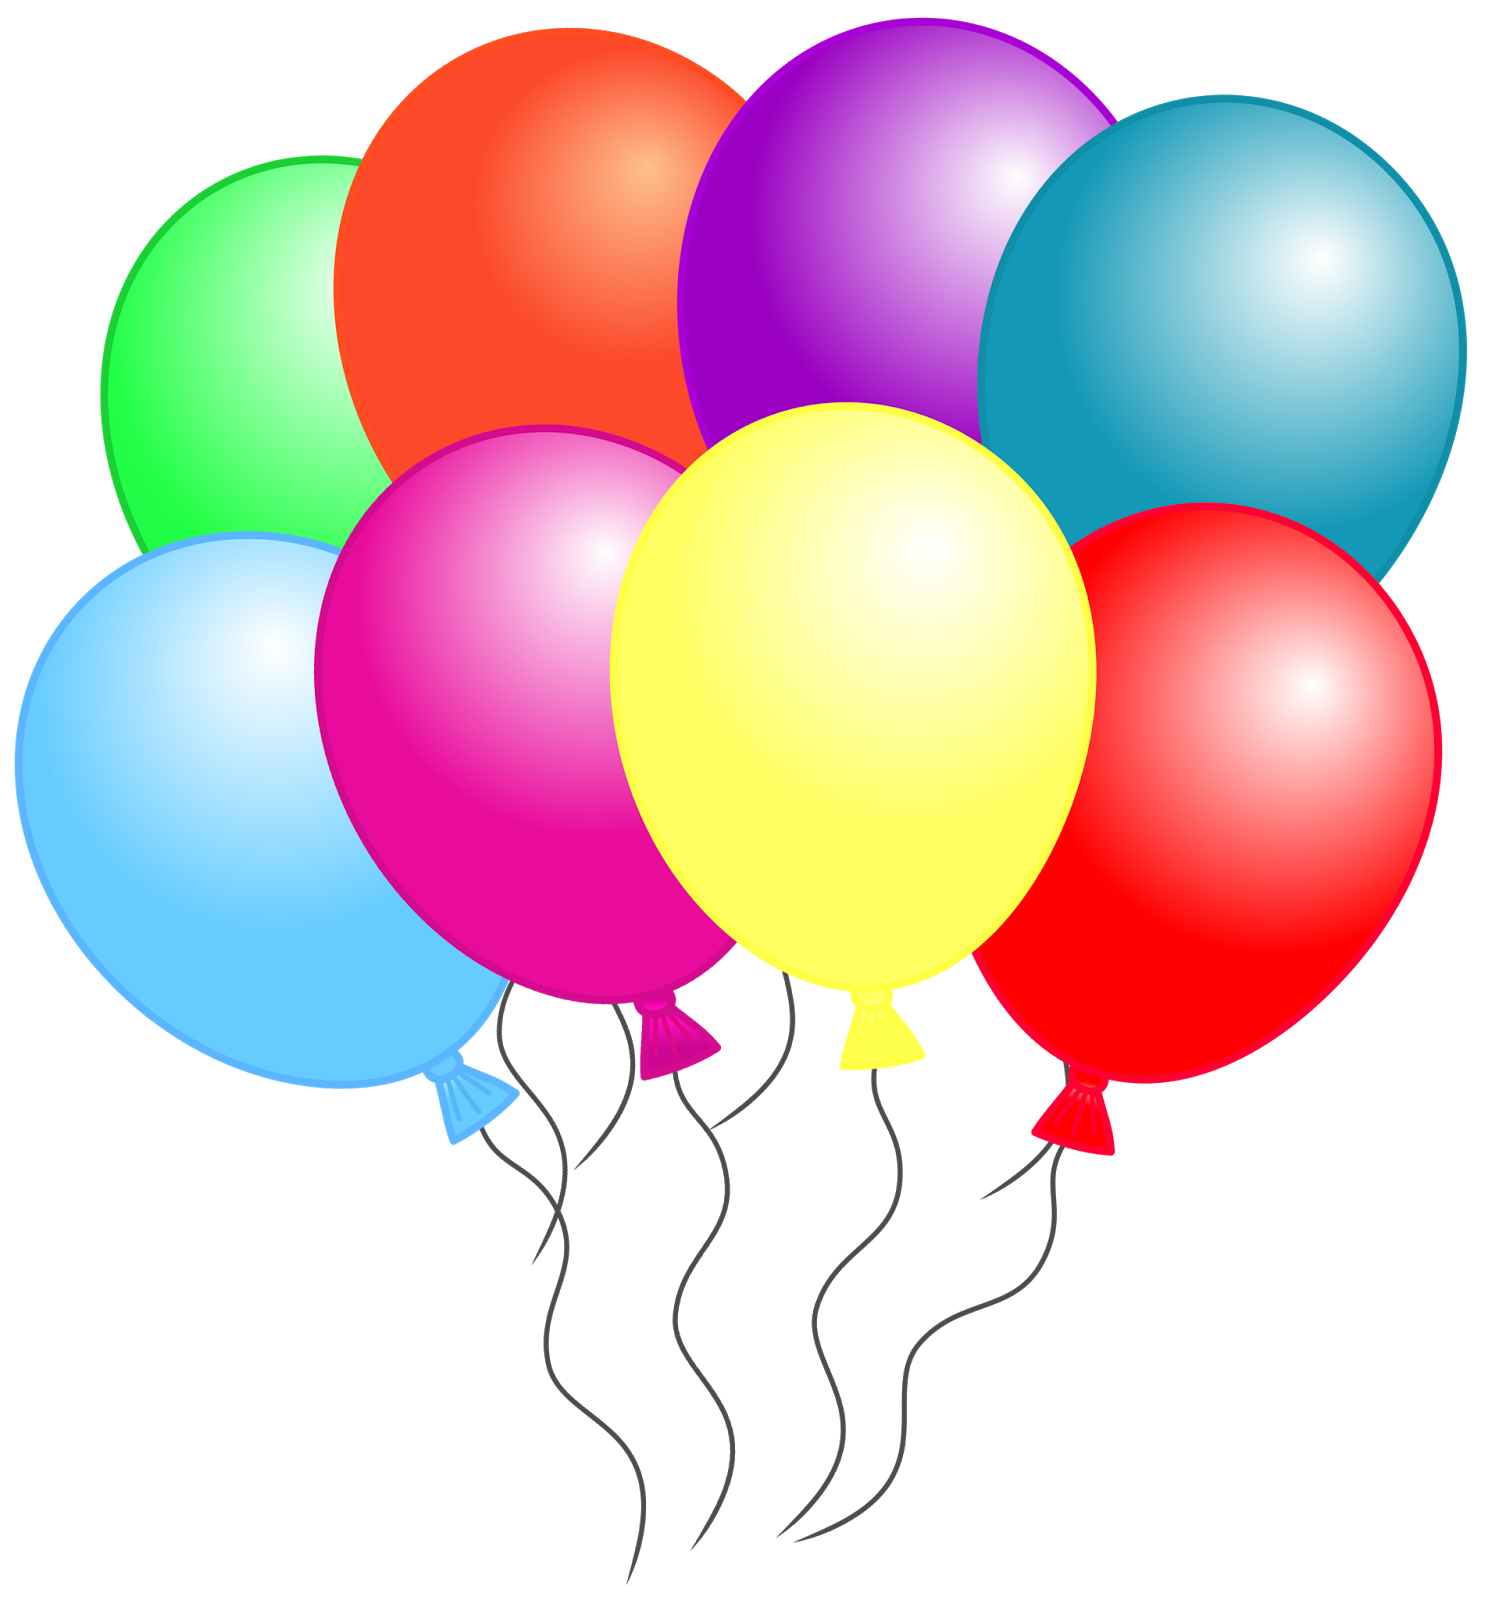 Balloon that can be. Clipart present classroom